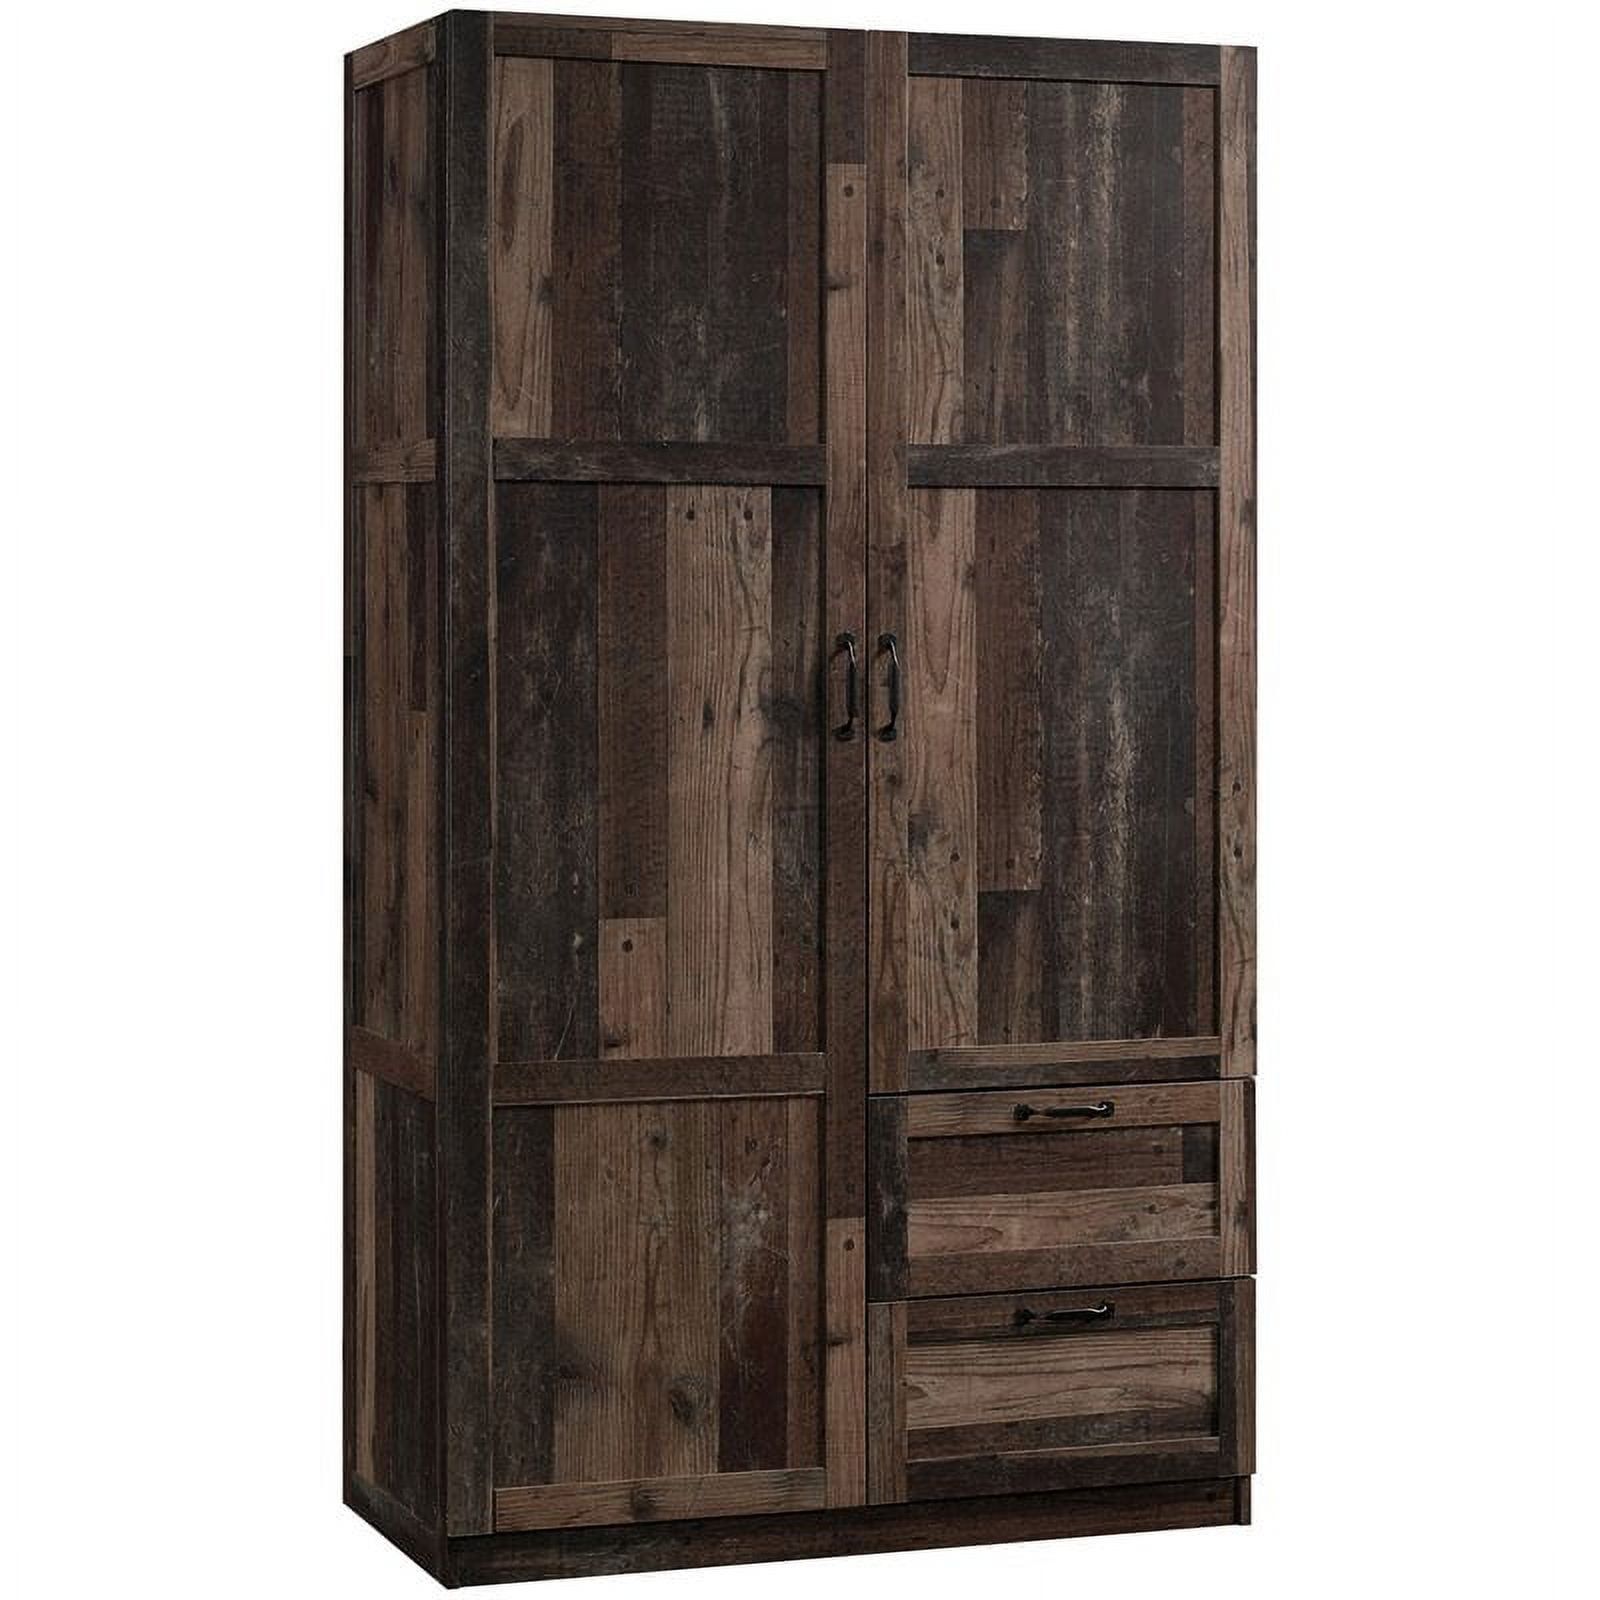 Pemberly Row Wooden Wardrobe Armoire In Rustic Reclaimed Pine – Walmart With Regard To Pine Wardrobes With Drawers (View 15 of 15)